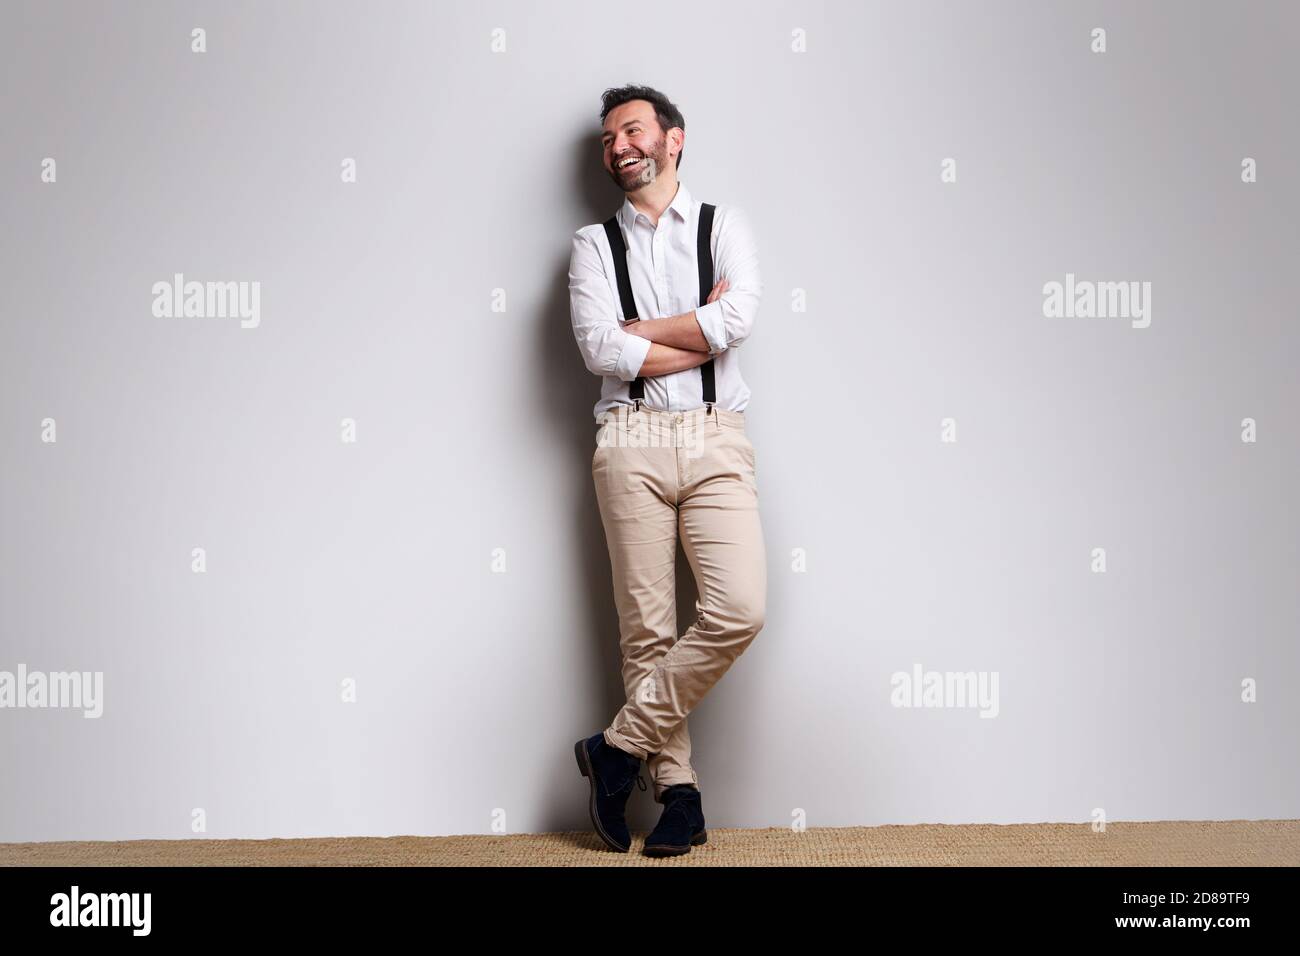 Full length portrait of happy man with suspenders laughing against gray background Stock Photo